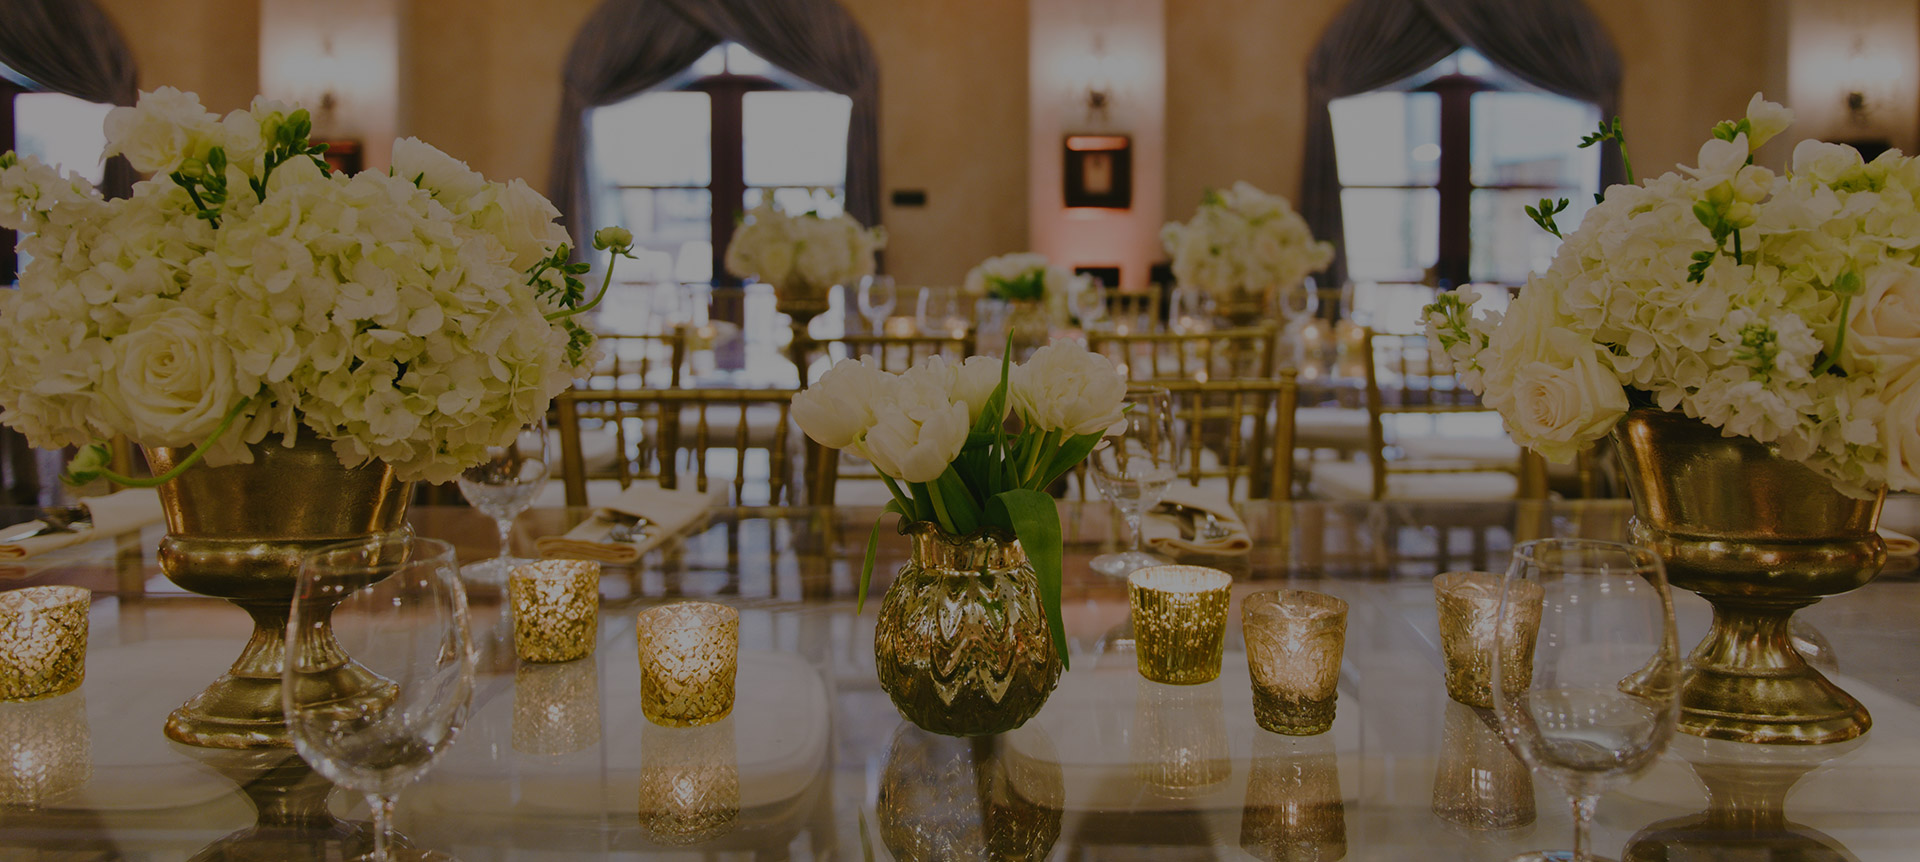 wedding decor on tables at the venue with floral details